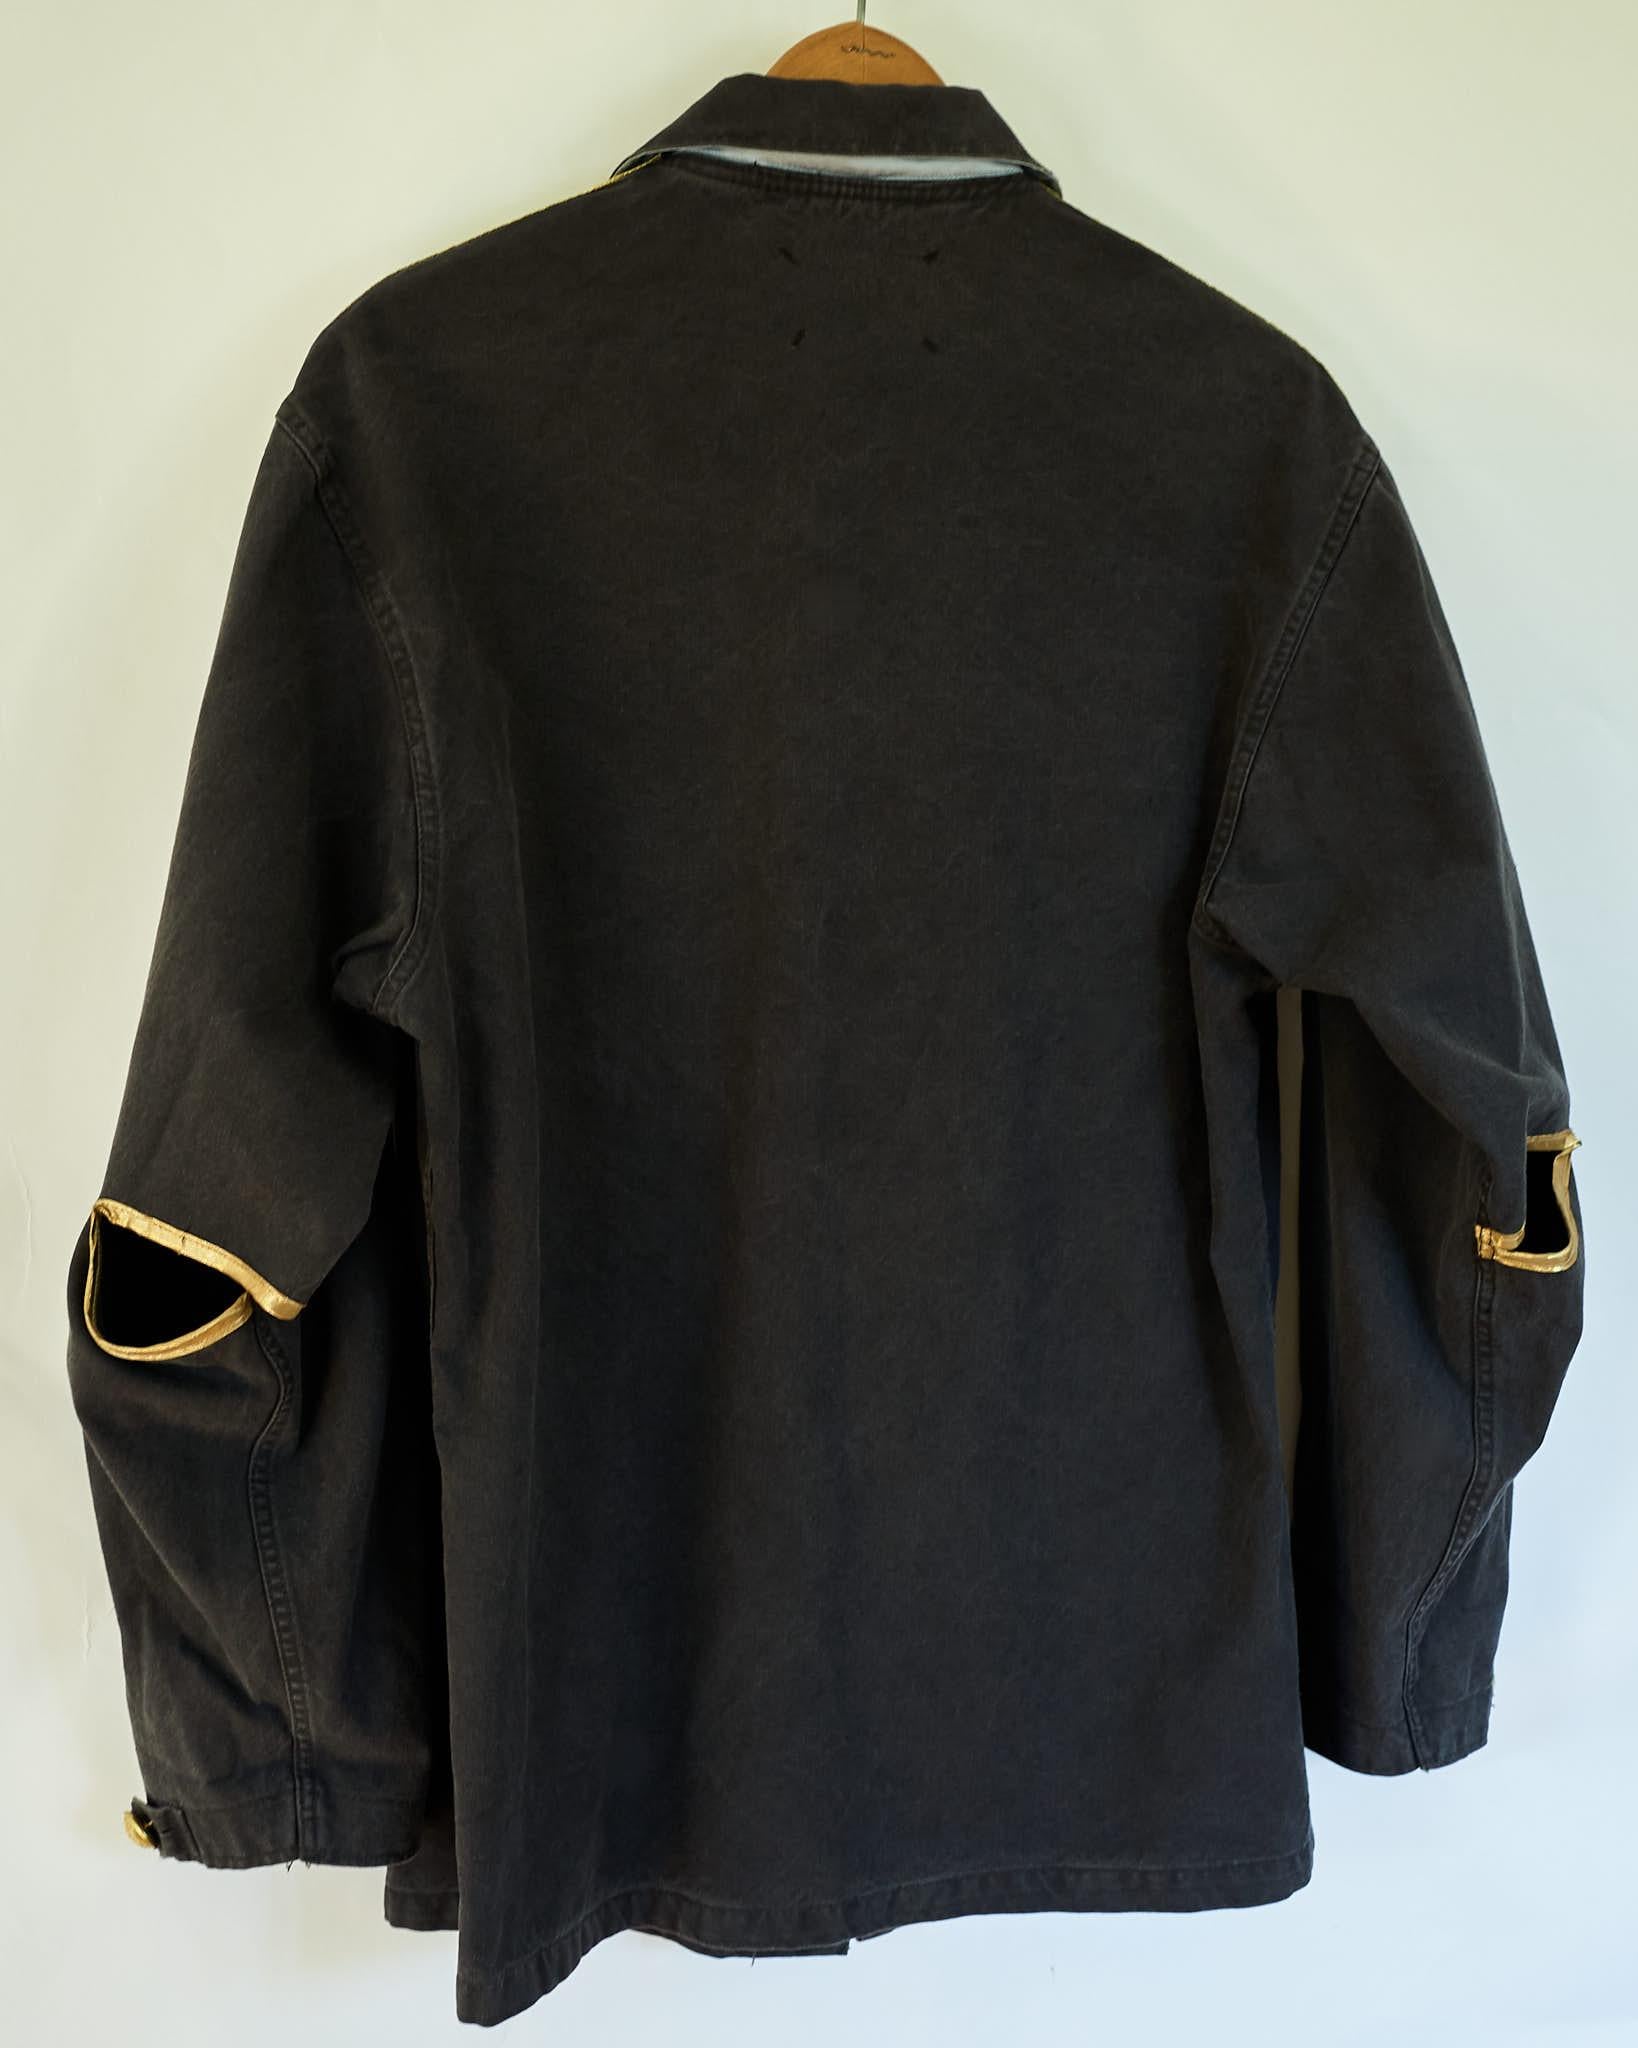 Women's Jacket Grey Oversize Vintage Military Gold Lurex One of a kind J Dauphin